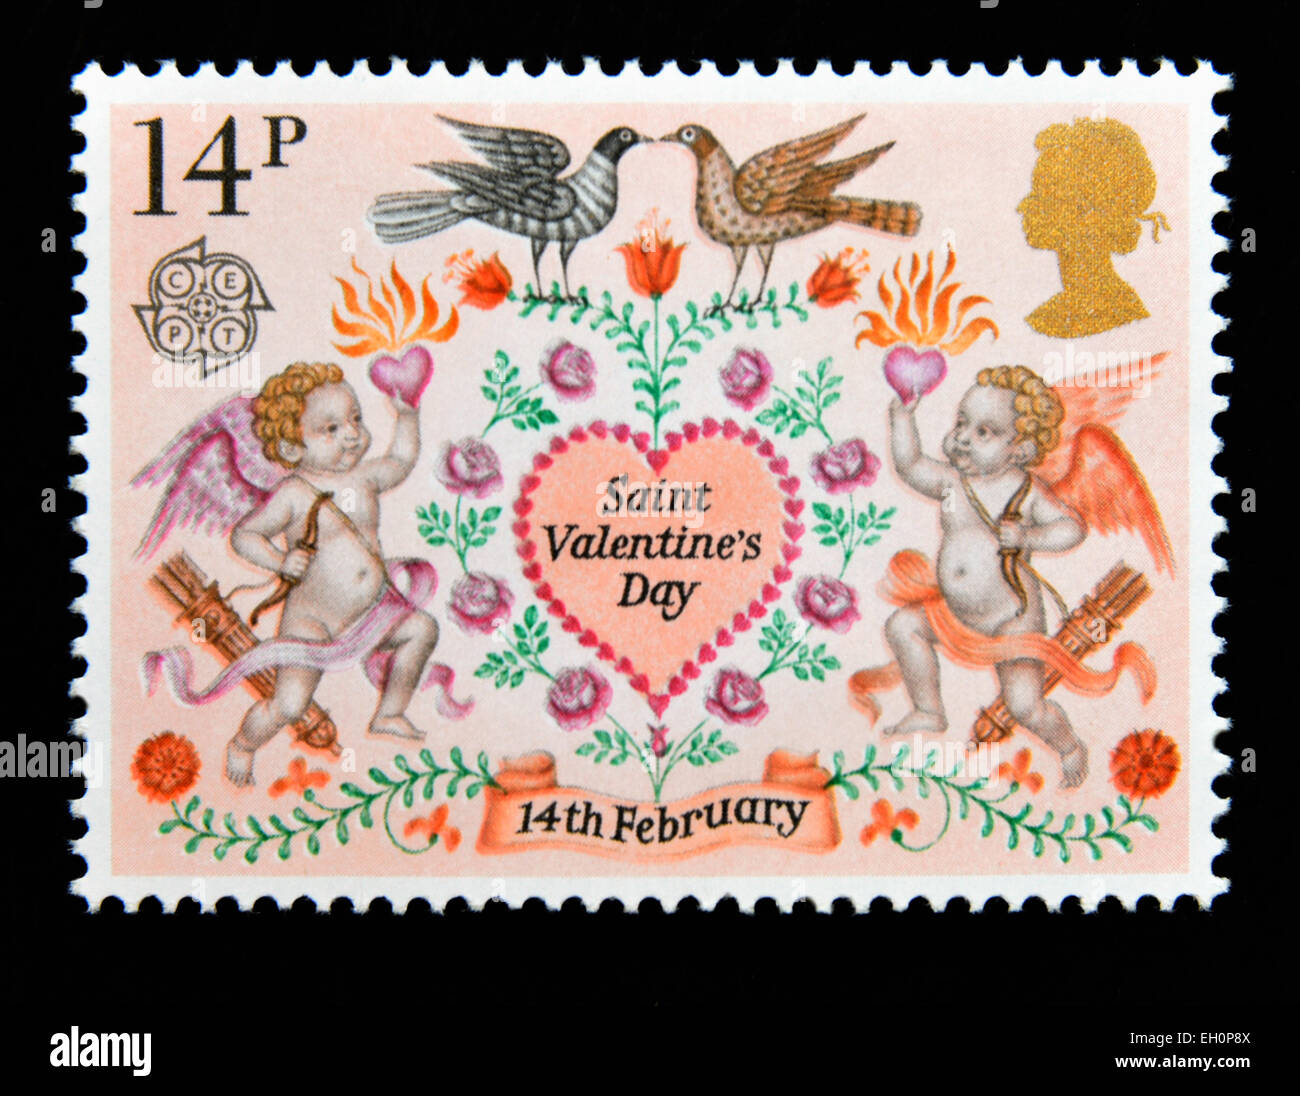 Postage stamp. Great Britain. Queen Elizabeth II. 1980. Folklore. Saint Valentine's Day. 14th.February. 14p. Stock Photo